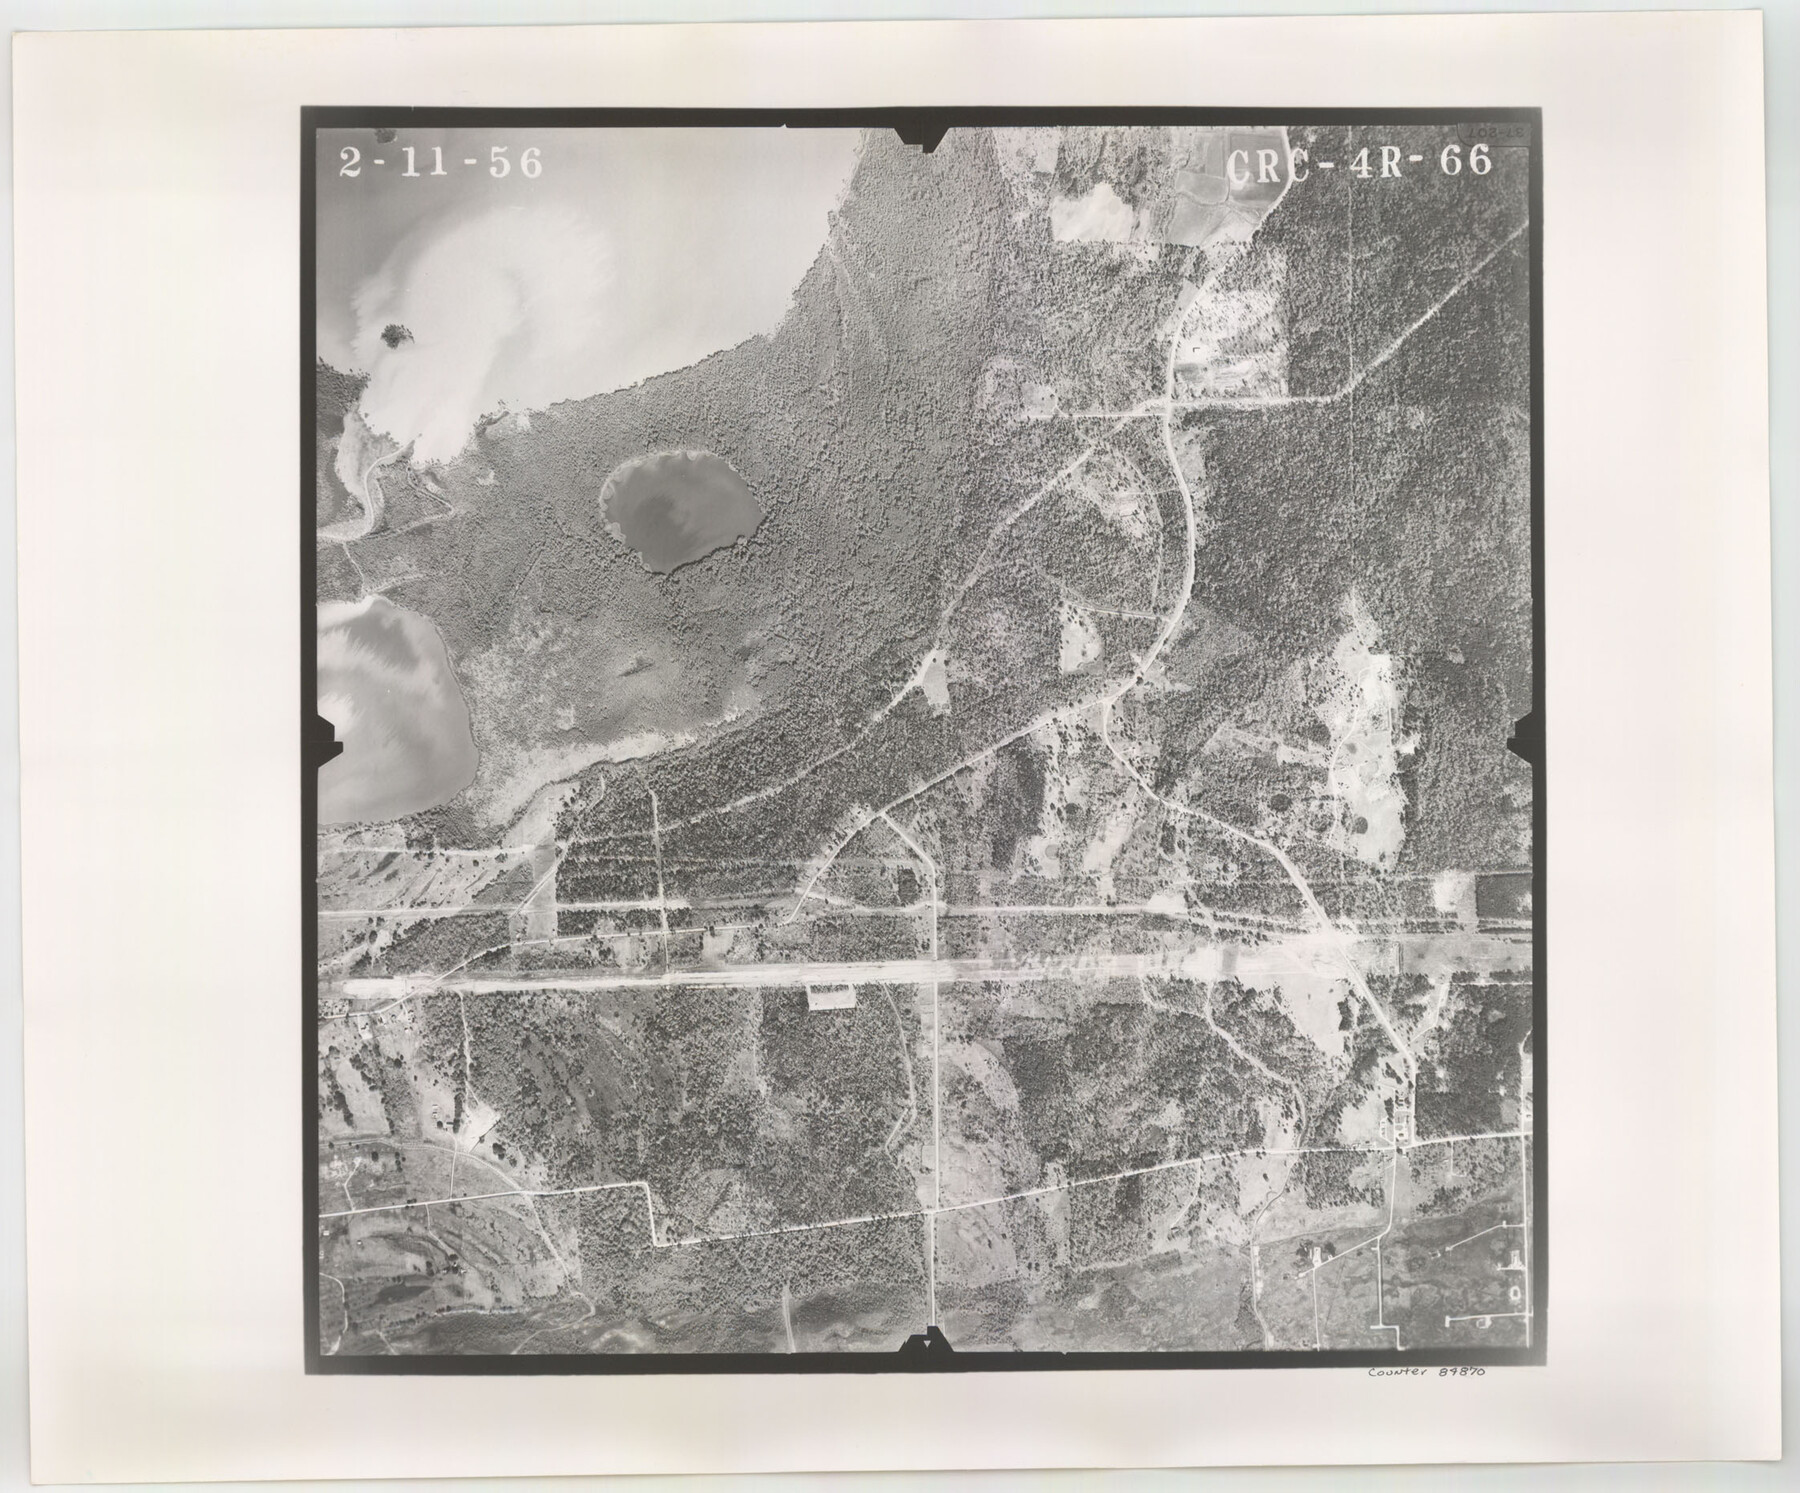 84870, Flight Mission No. CRC-4R, Frame 66, Chambers County, General Map Collection